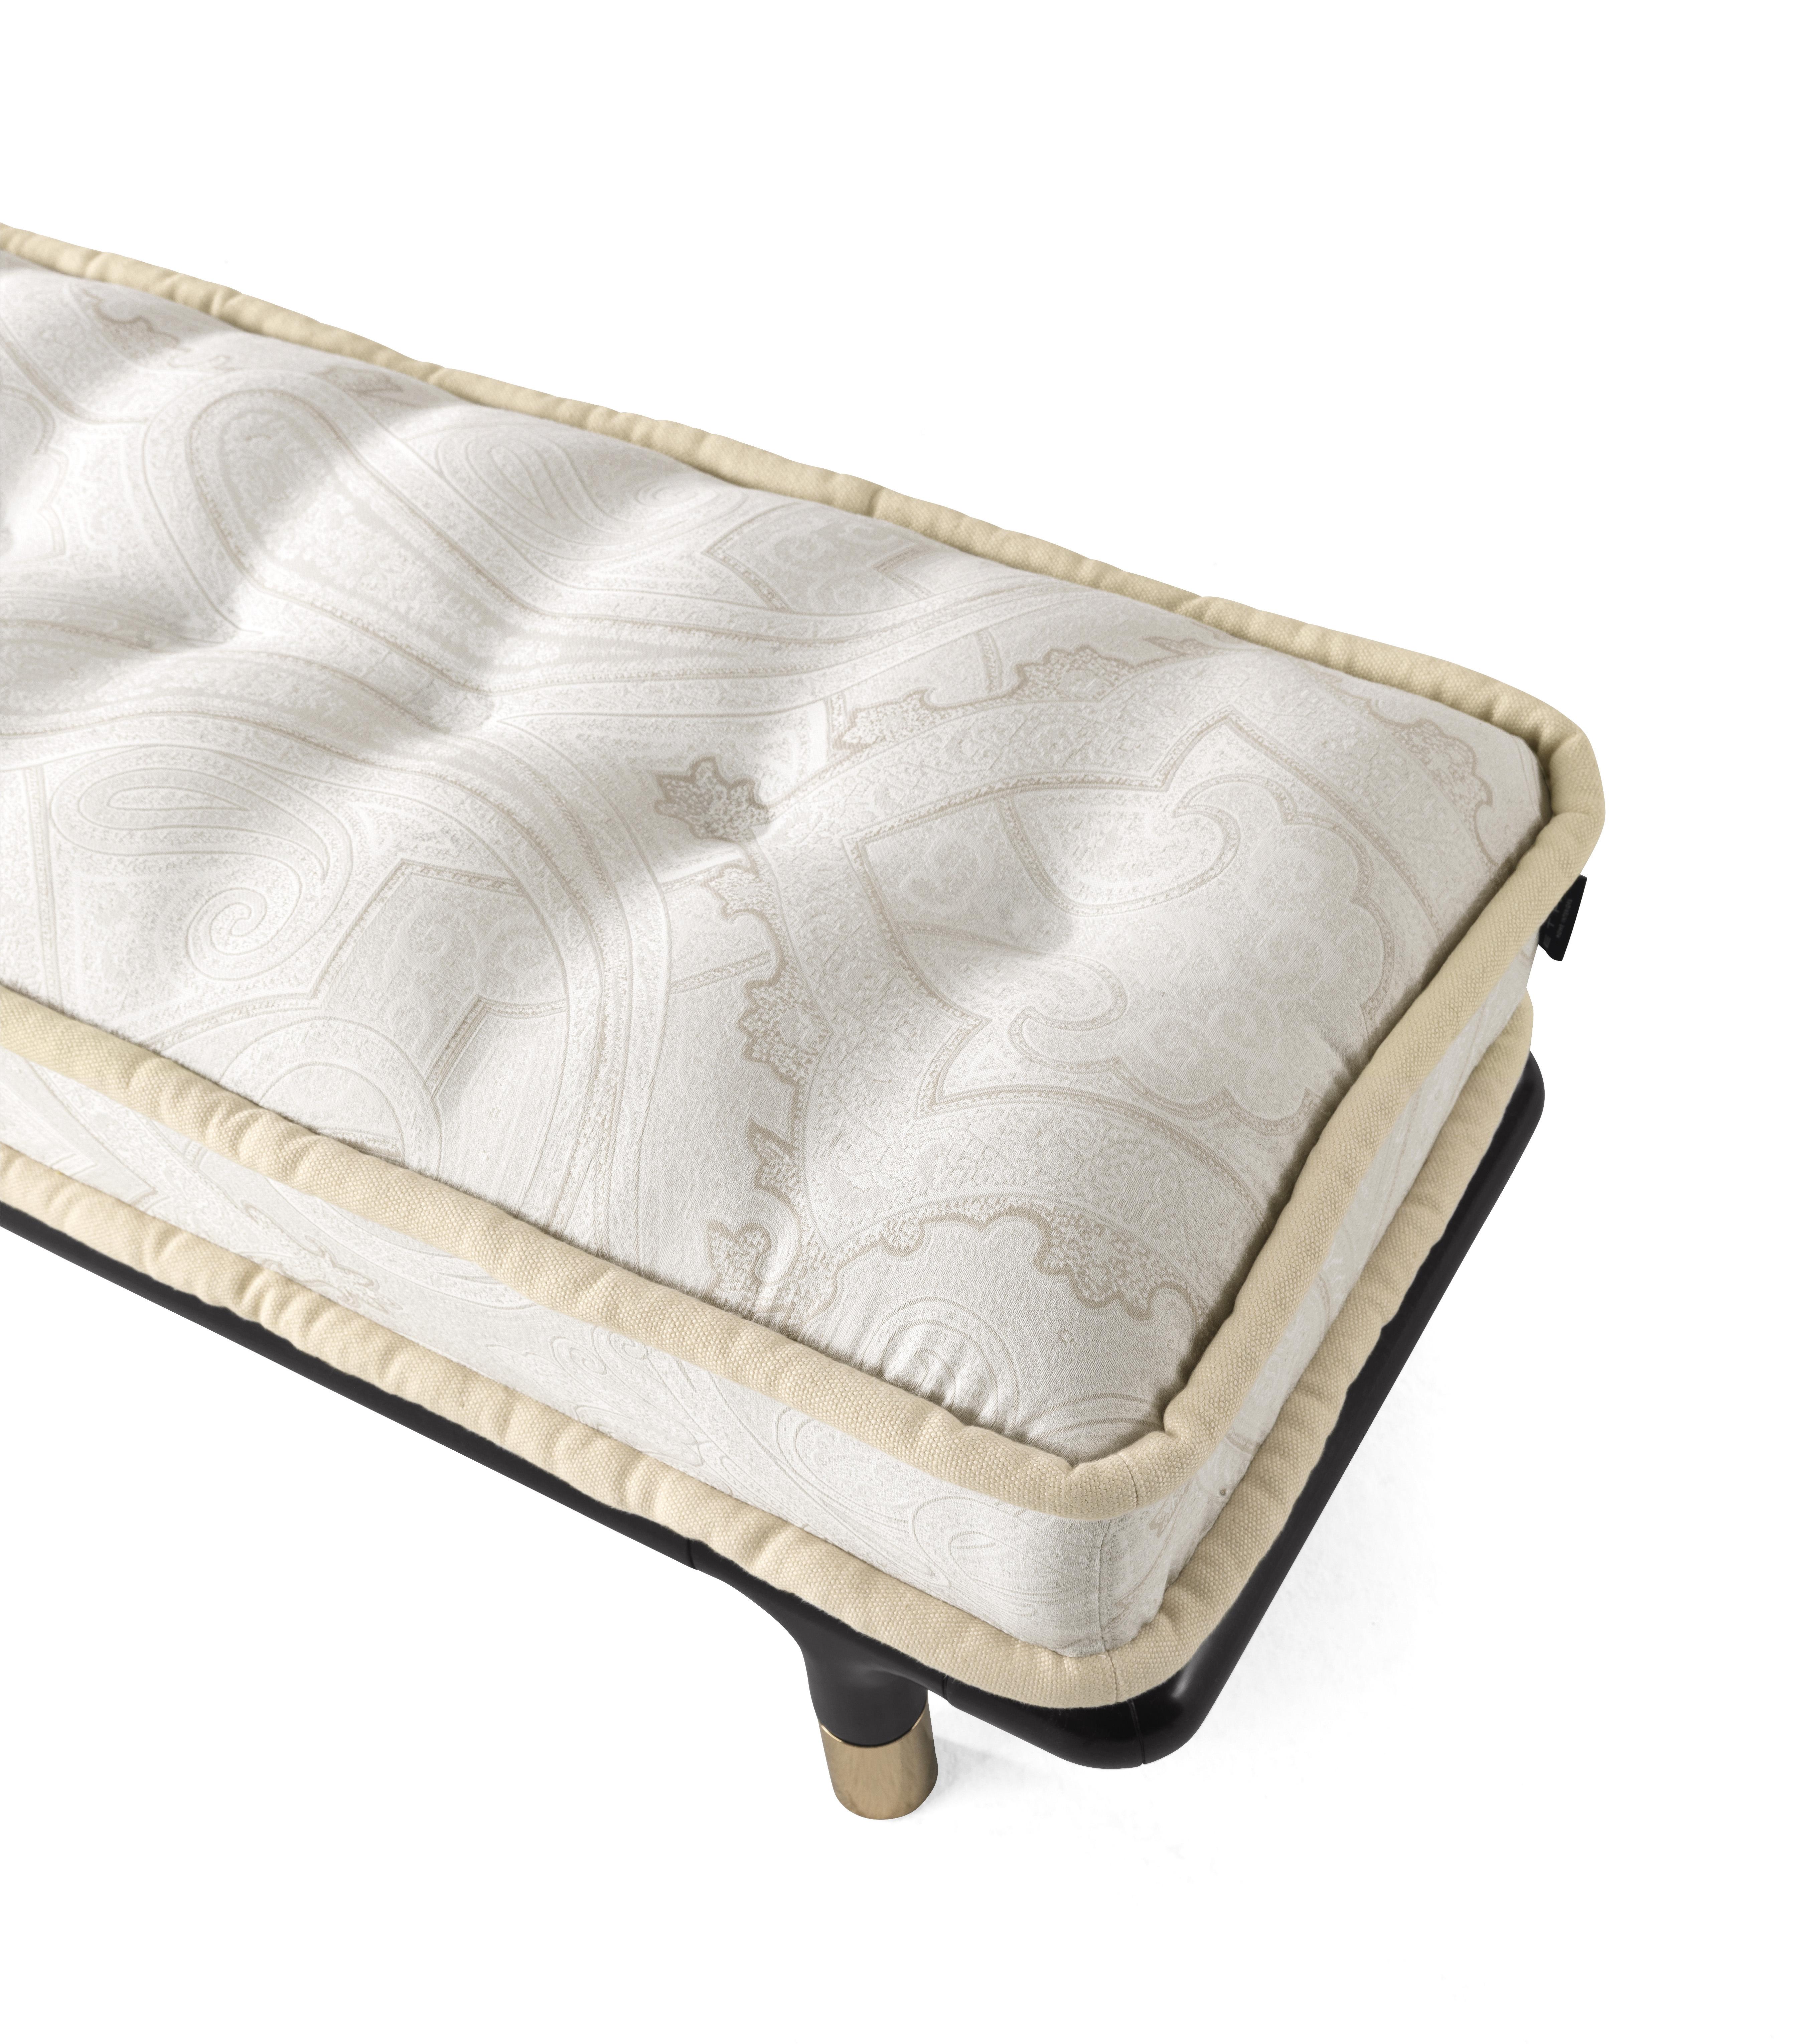 Italian 21st Century Woodstock Bench in Fabric by Etro Home Interiors For Sale